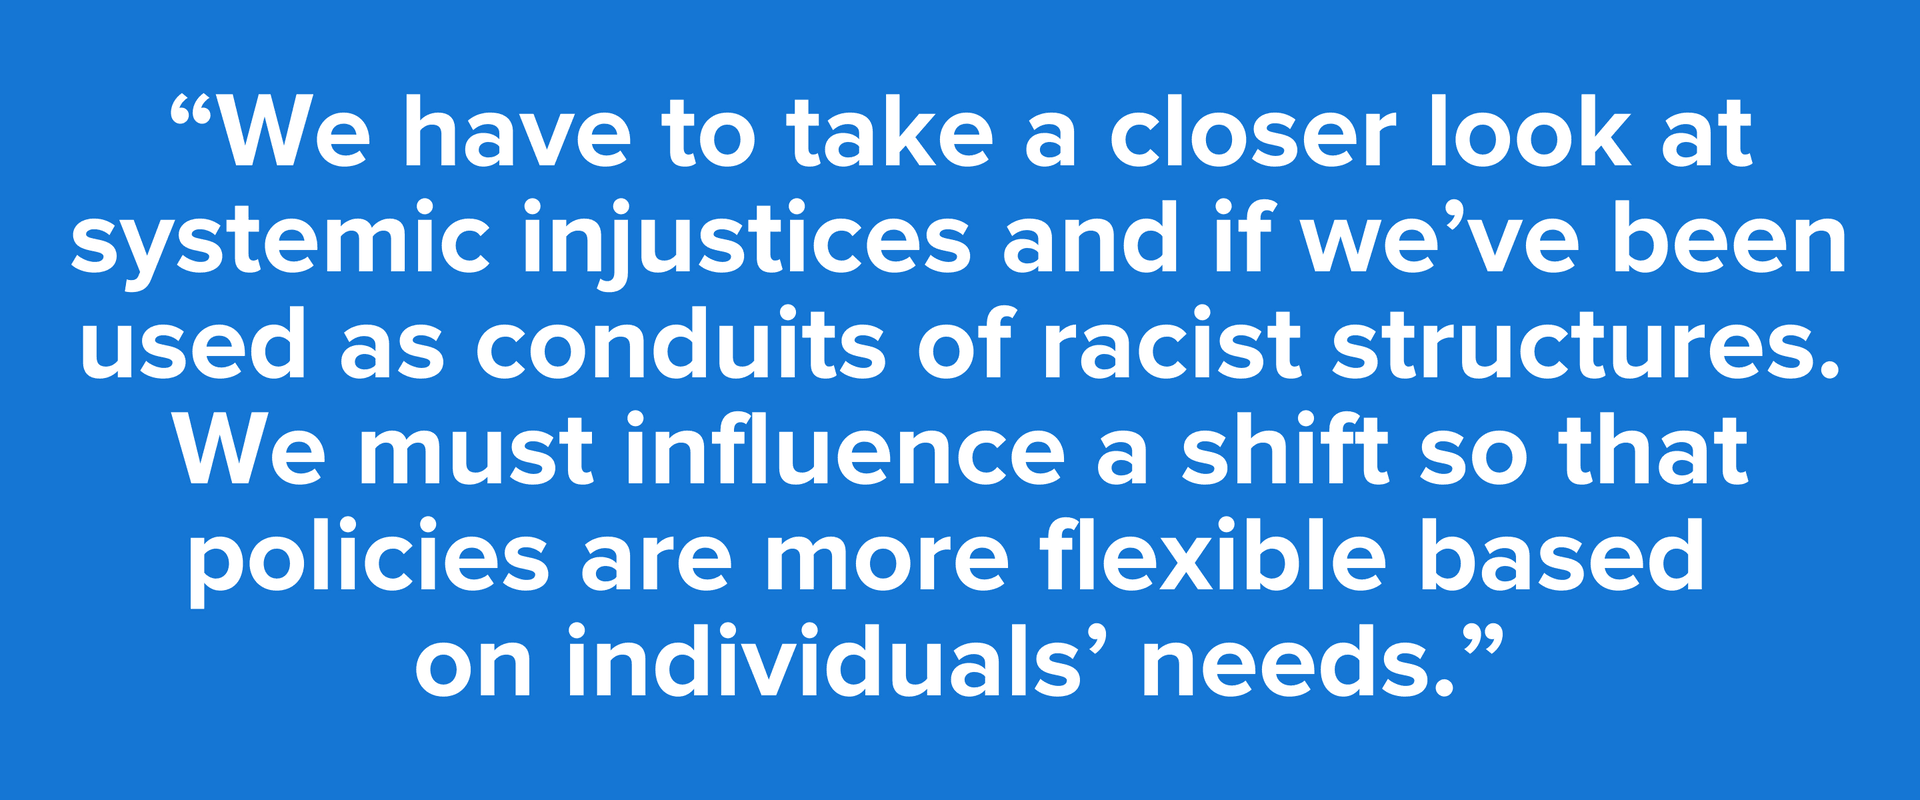 “We have to take a closer look at systemic injustices and if we’ve been used as conduits of racist structures. We must influence a shift so that policies are more flexible based on individuals’ needs.”